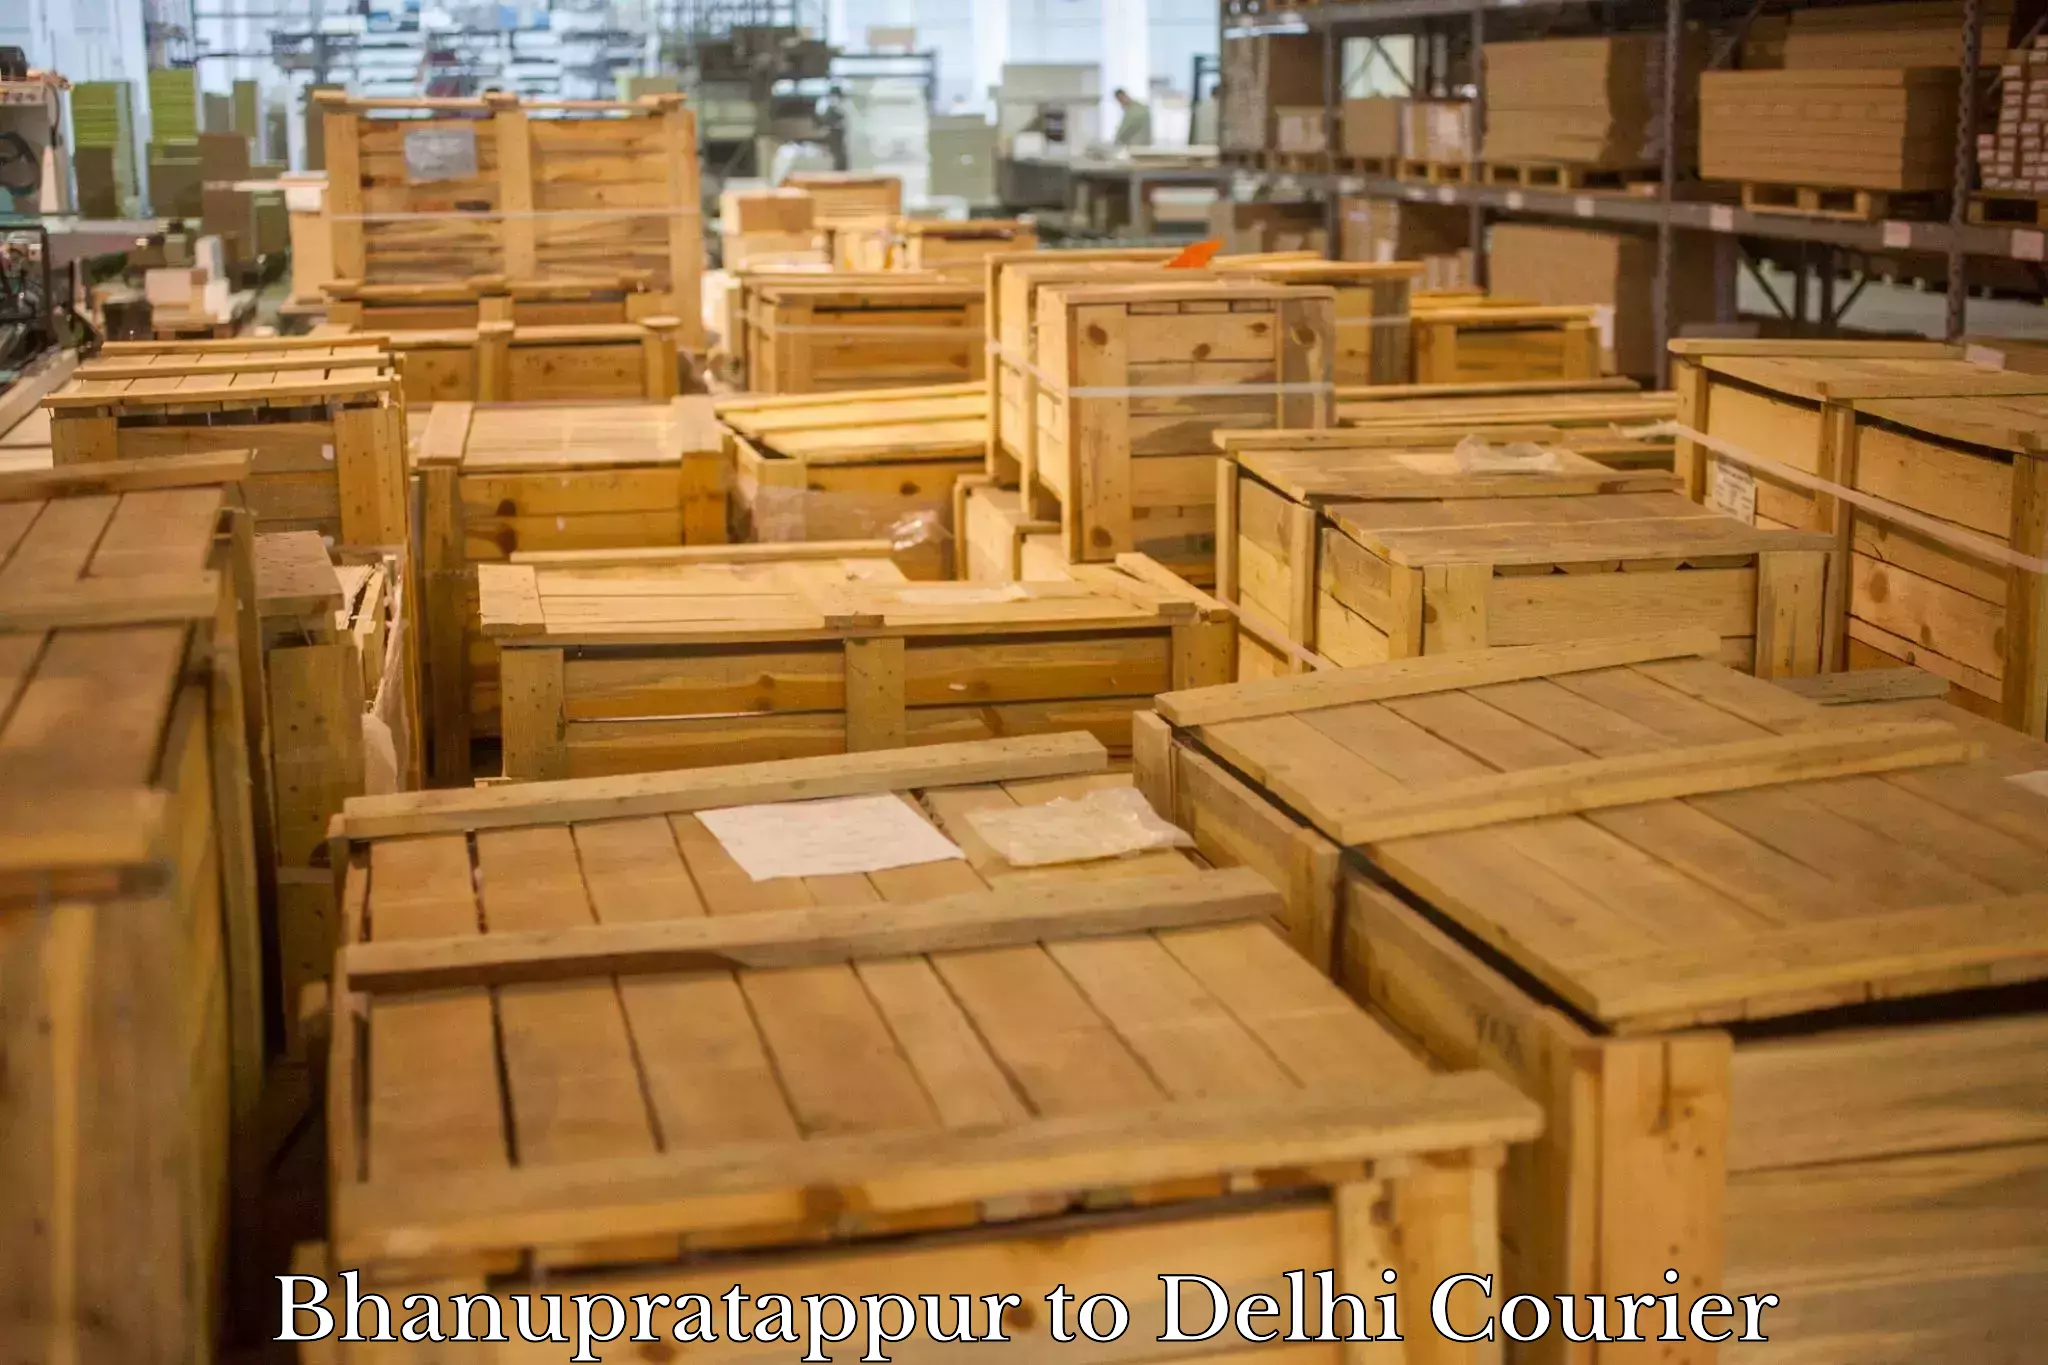 Holiday shipping services Bhanupratappur to NCR